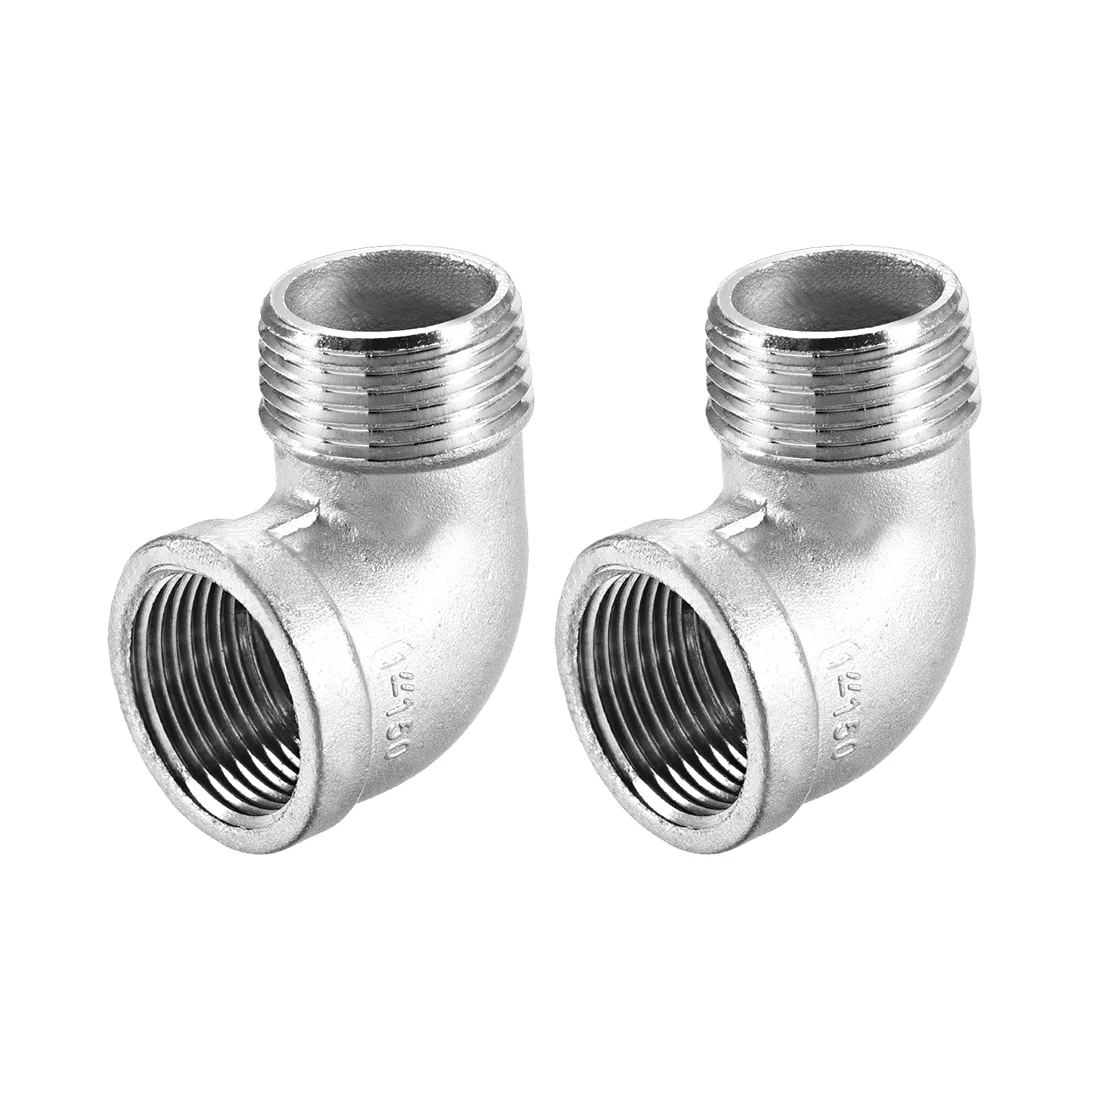 

uxcell 2pcs Stainless Steel 201 Cast Pipe Fitting 90 Degree Elbow 1 BSPT Female X 1 BSPT Male Thread for air, water, fuel